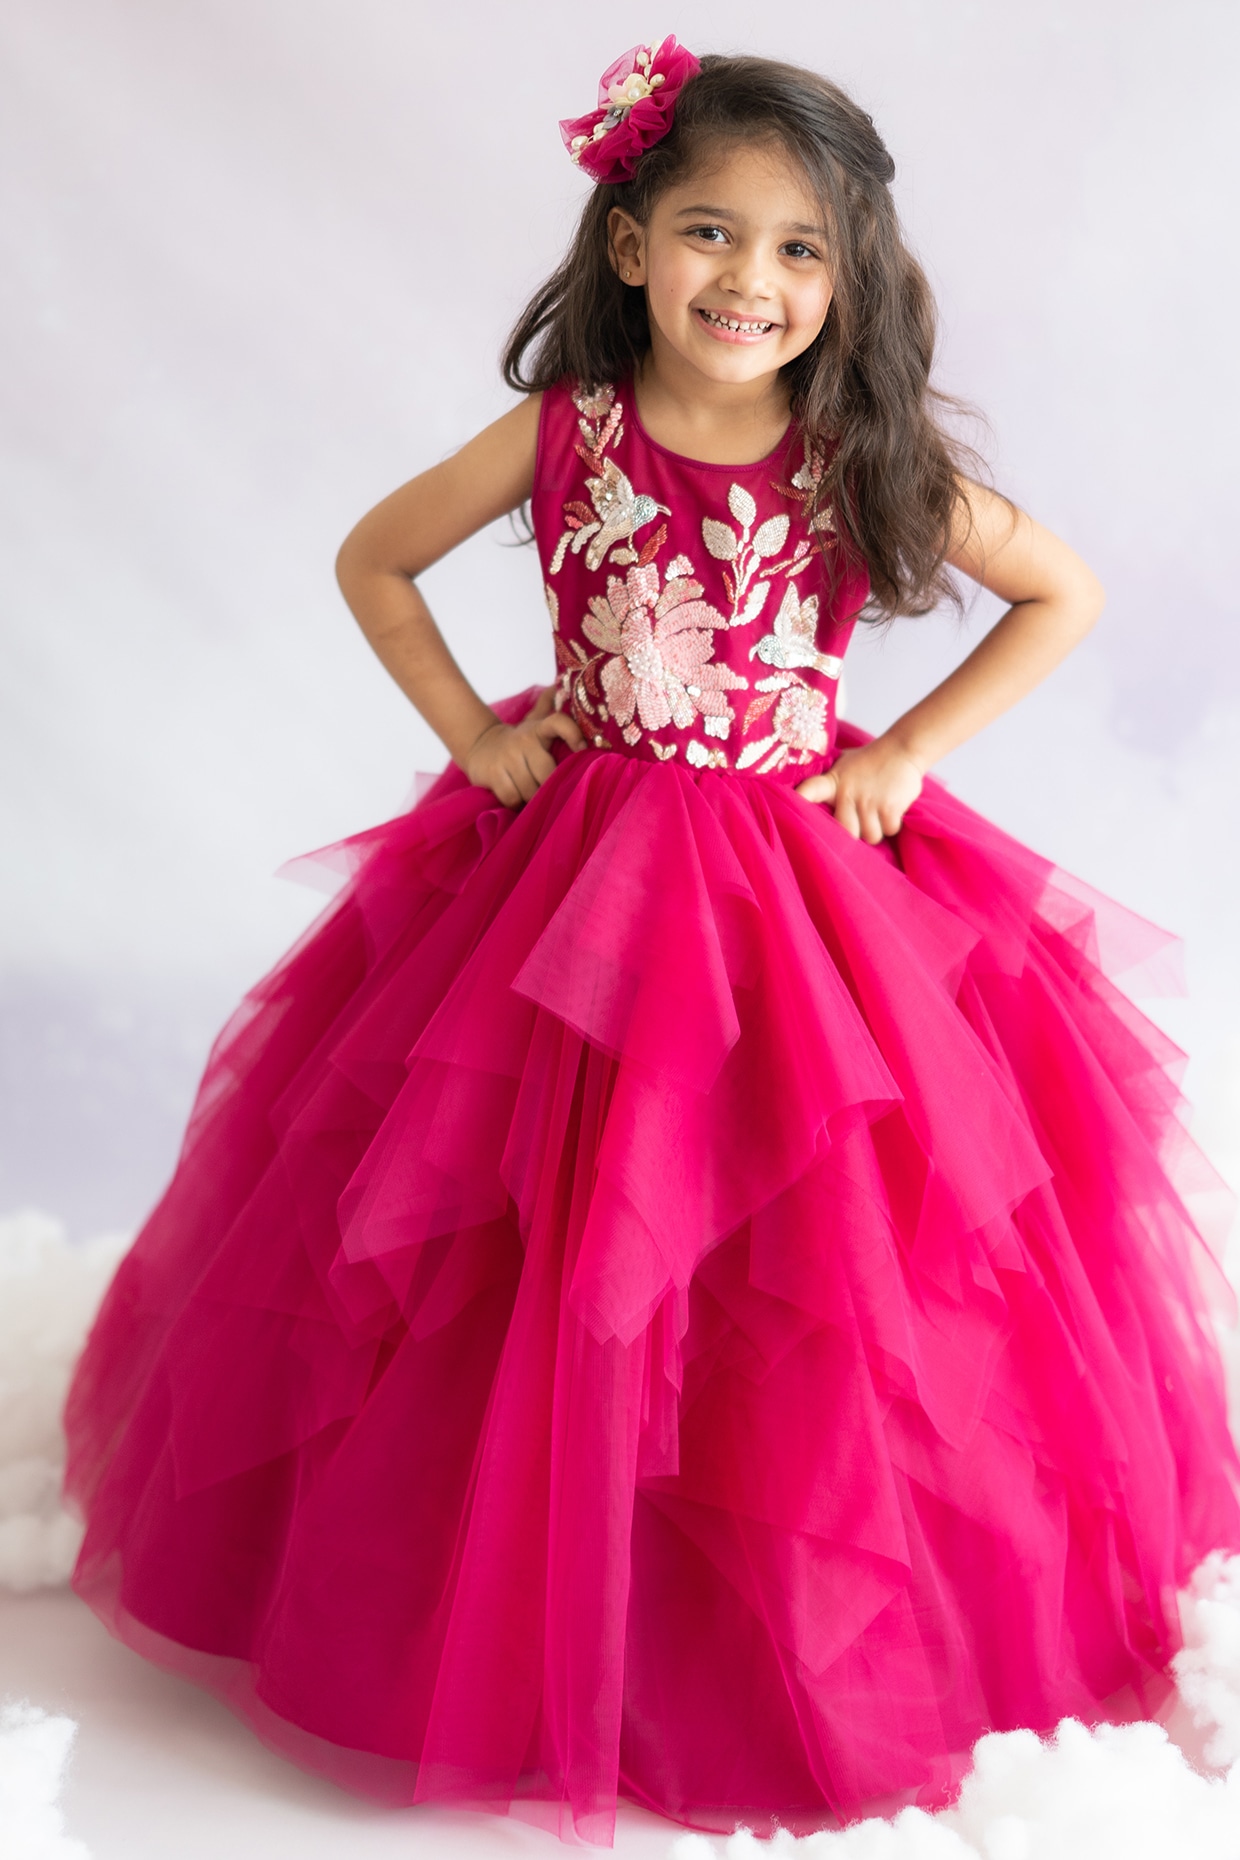 Premium Vector | Holiday shoes for girls children's model shoes beautiful  ball gown dress